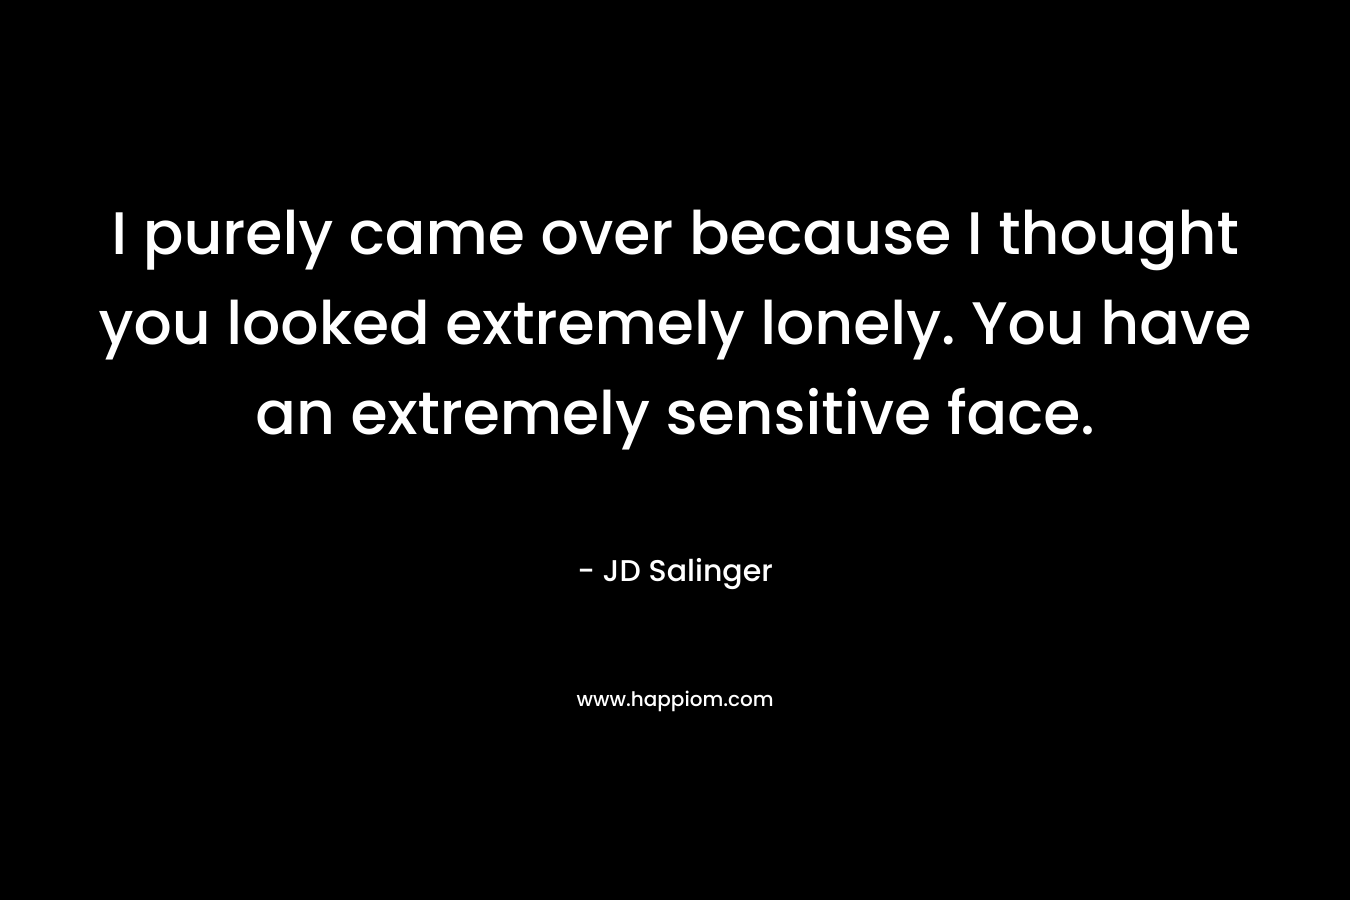 I purely came over because I thought you looked extremely lonely. You have an extremely sensitive face. – JD Salinger